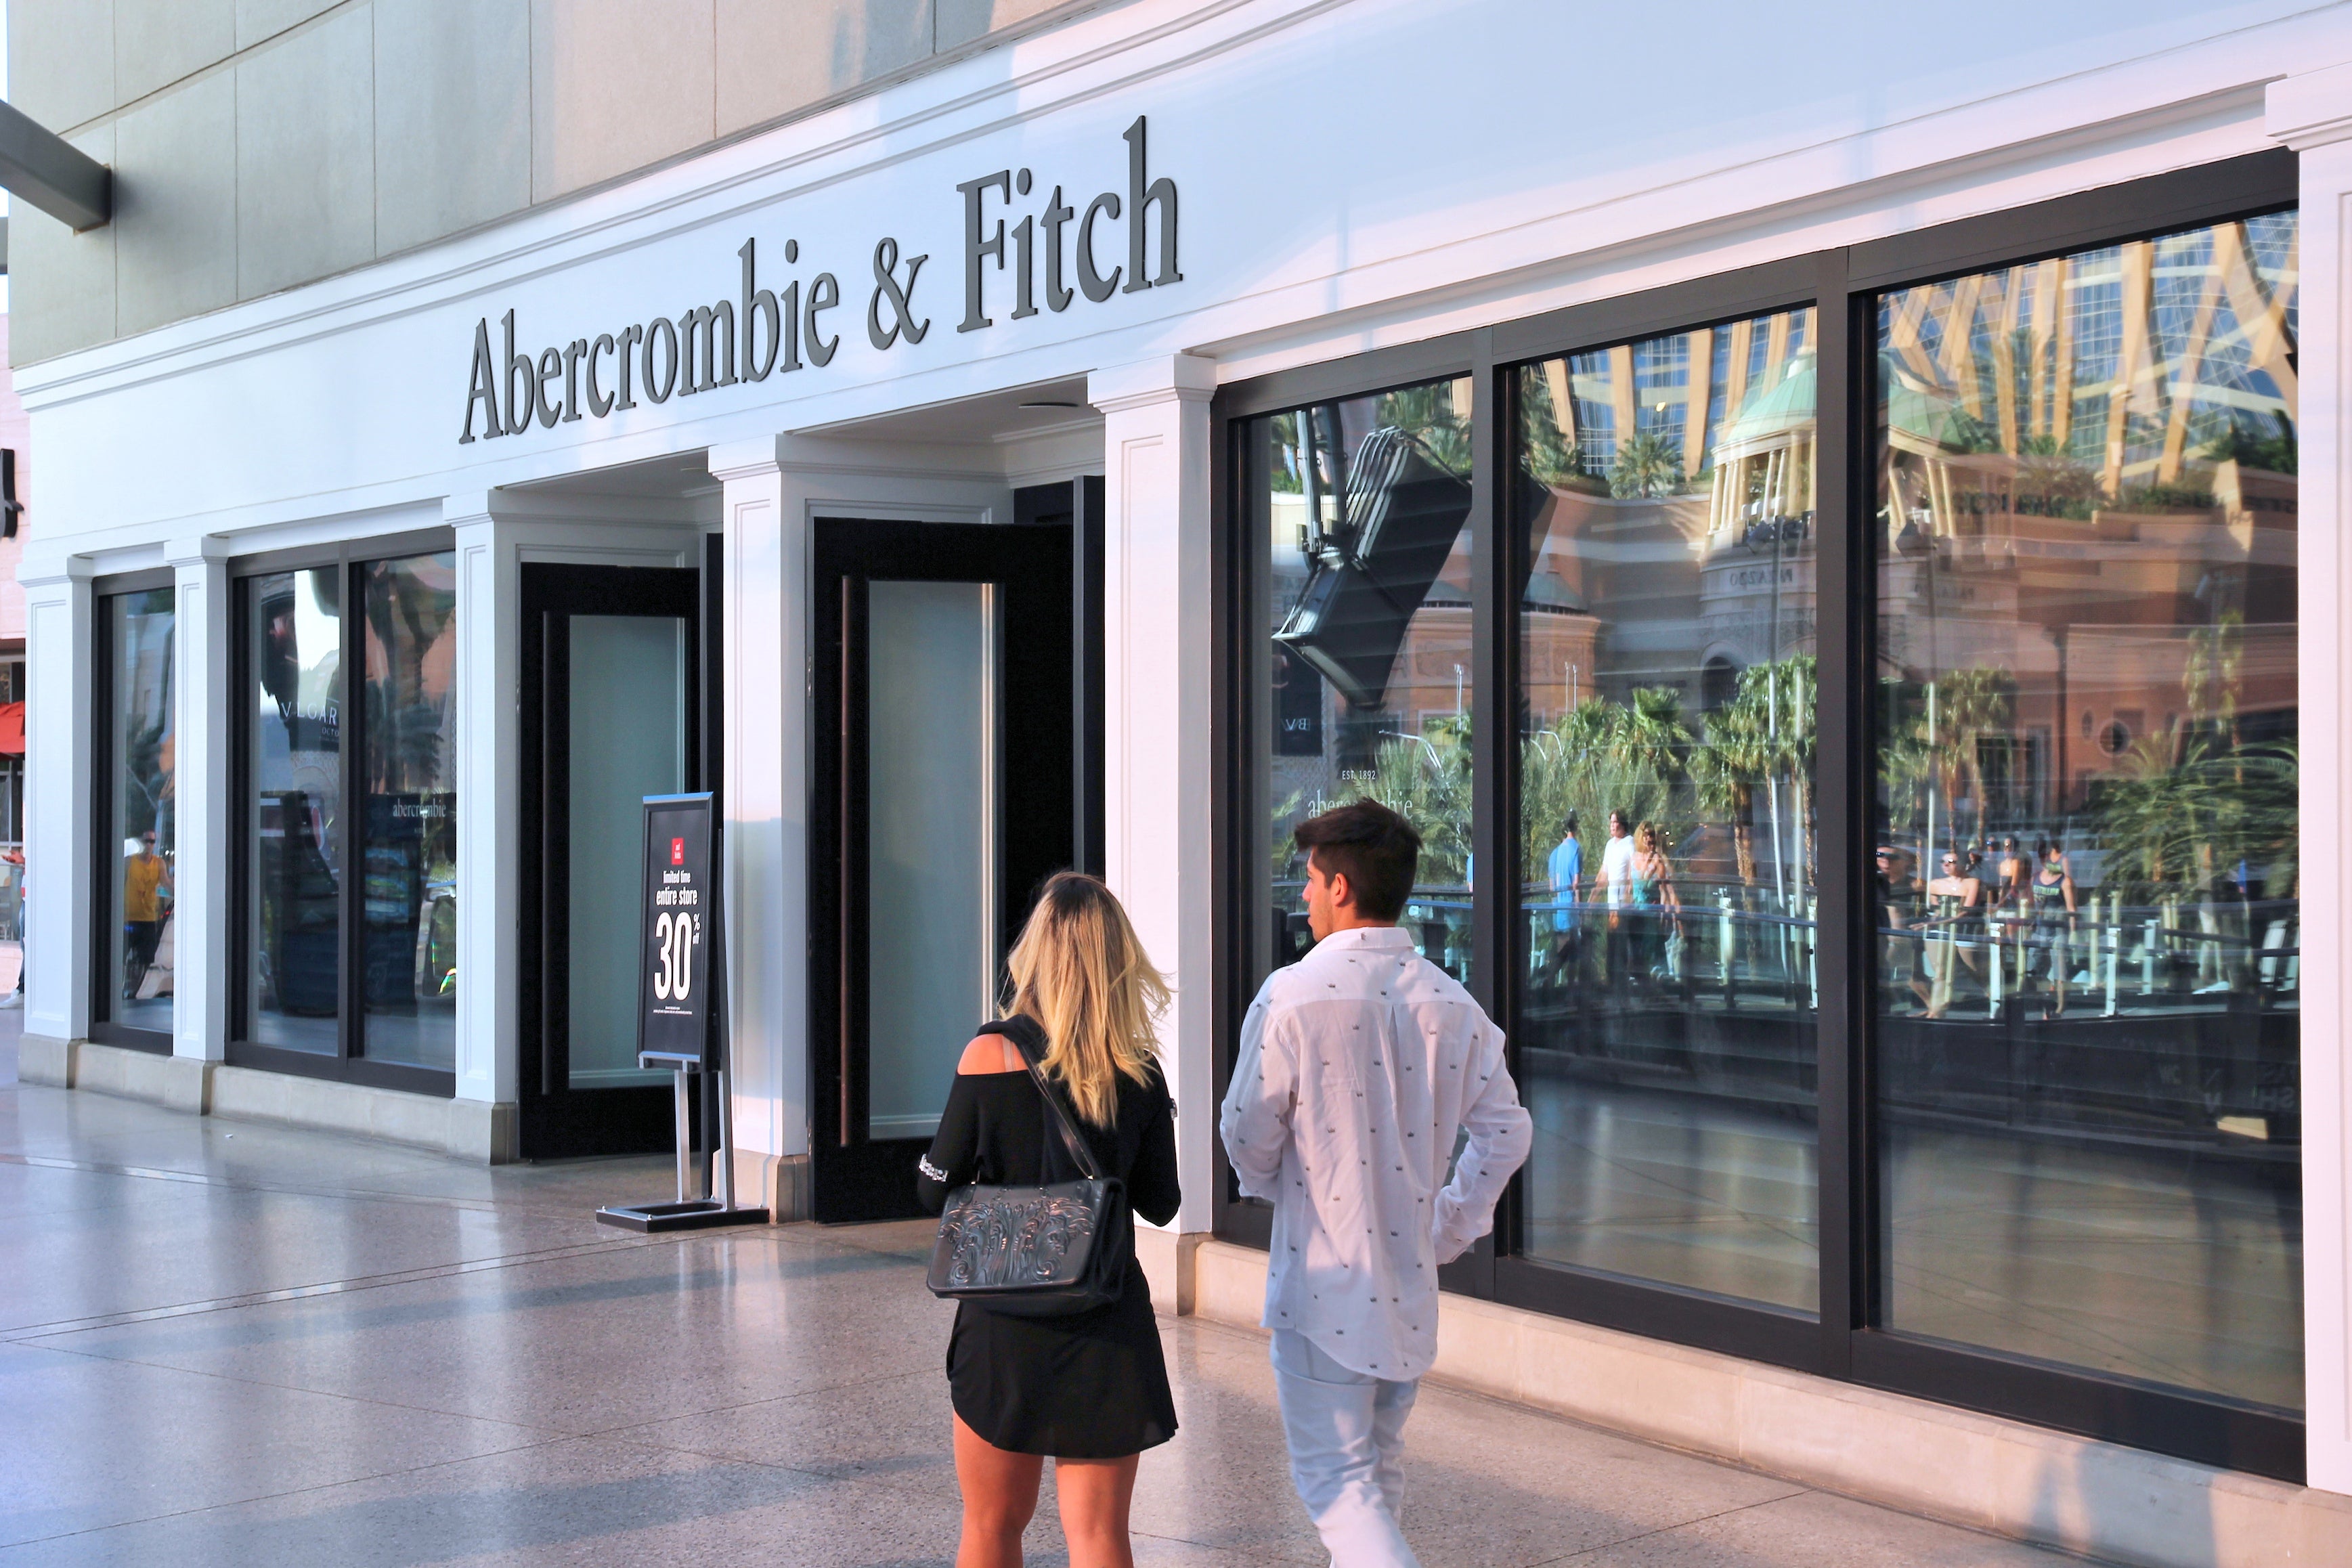 Abercrombie’s marketing was elitist and aggressive